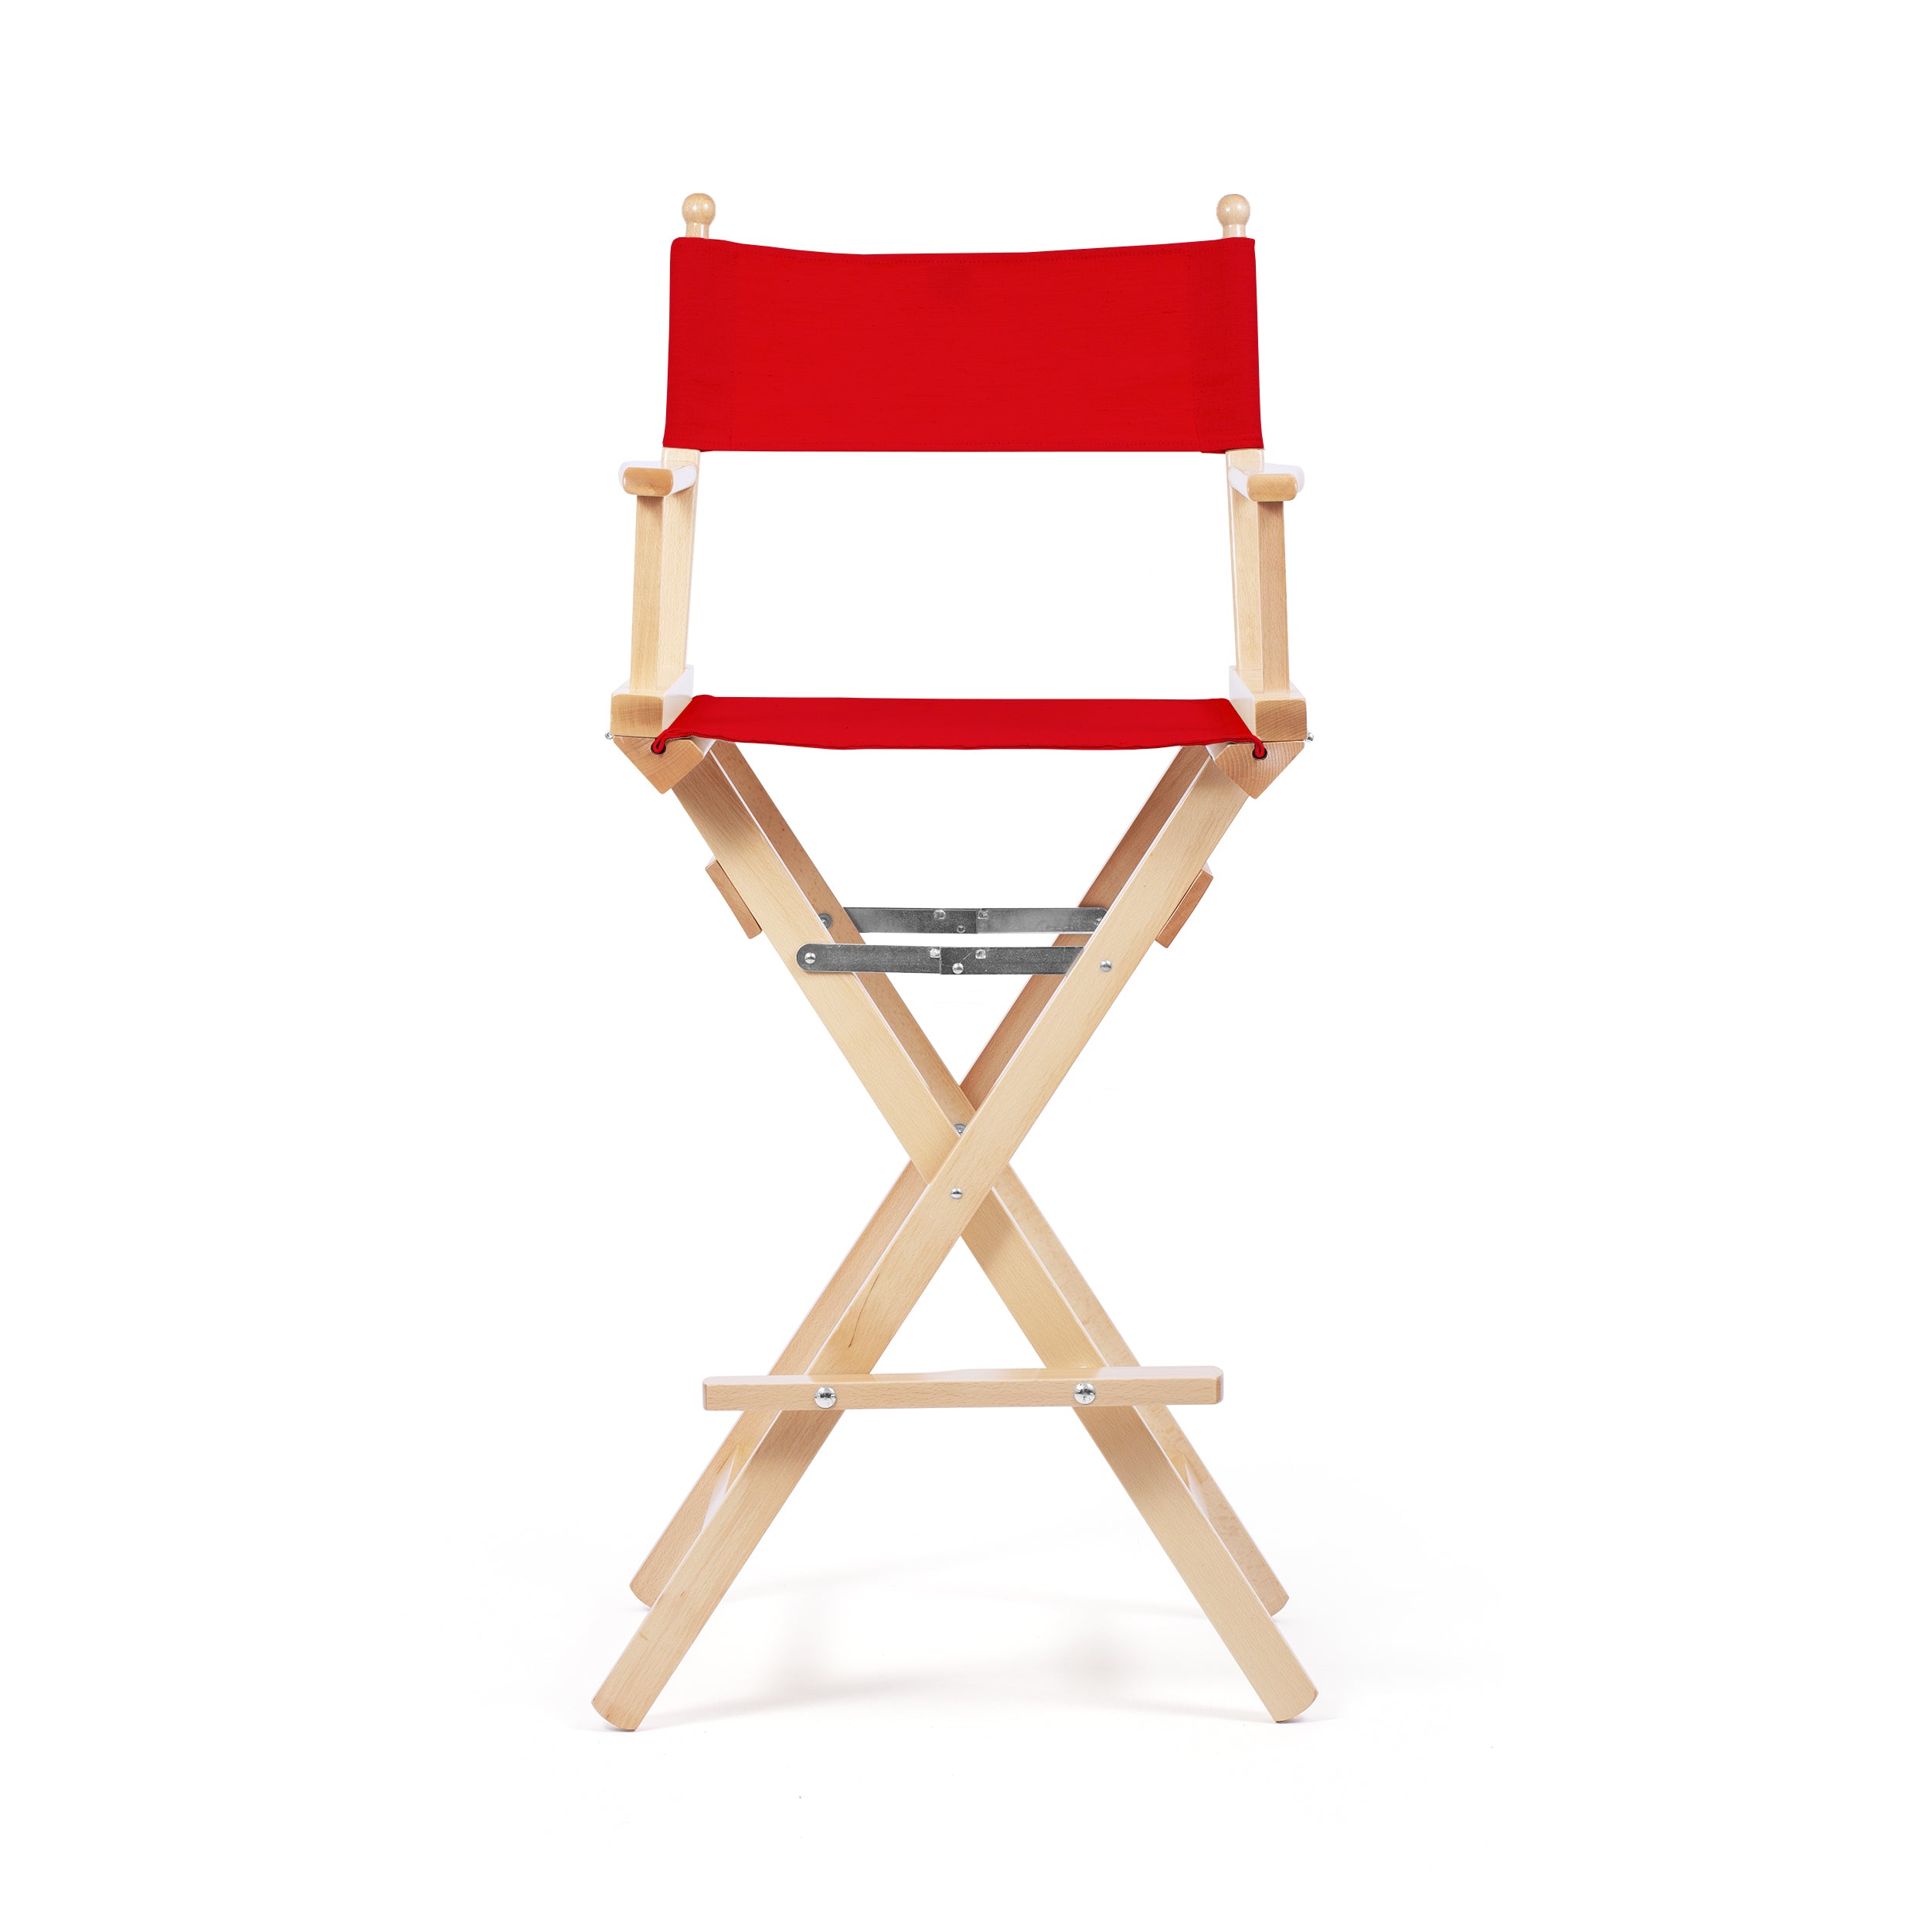 Director's Chair Make-up Primary Red Telami waterproof Design Made in Italy outdoor furniture patio chairs natural frame